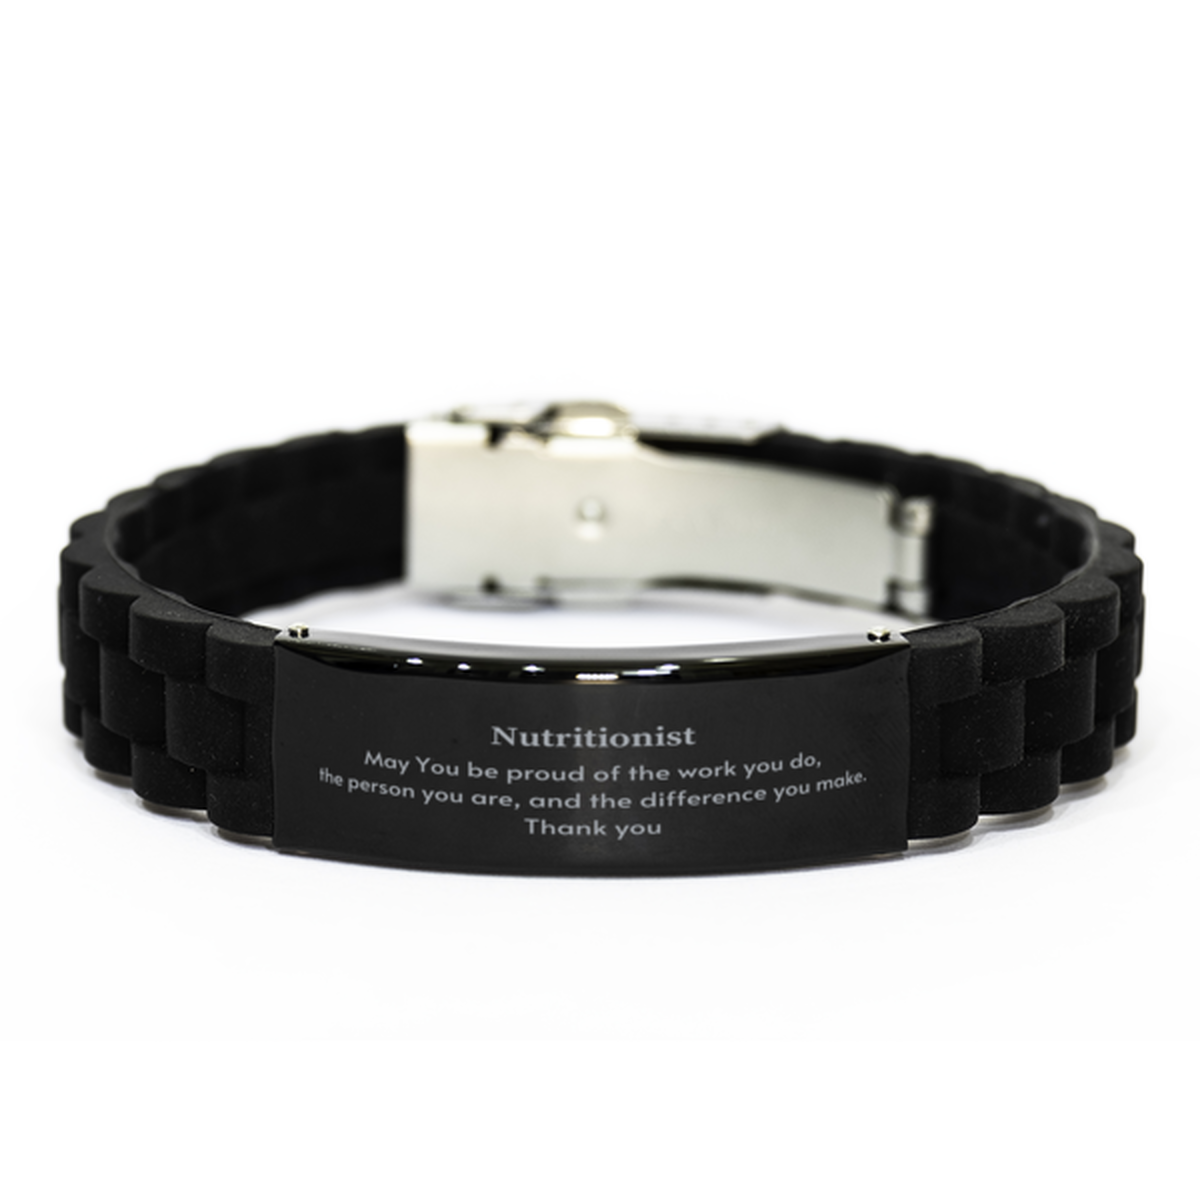 Heartwarming Black Glidelock Clasp Bracelet Retirement Coworkers Gifts for Nutritionist, Nutritionist May You be proud of the work you do, the person you are Gifts for Boss Men Women Friends